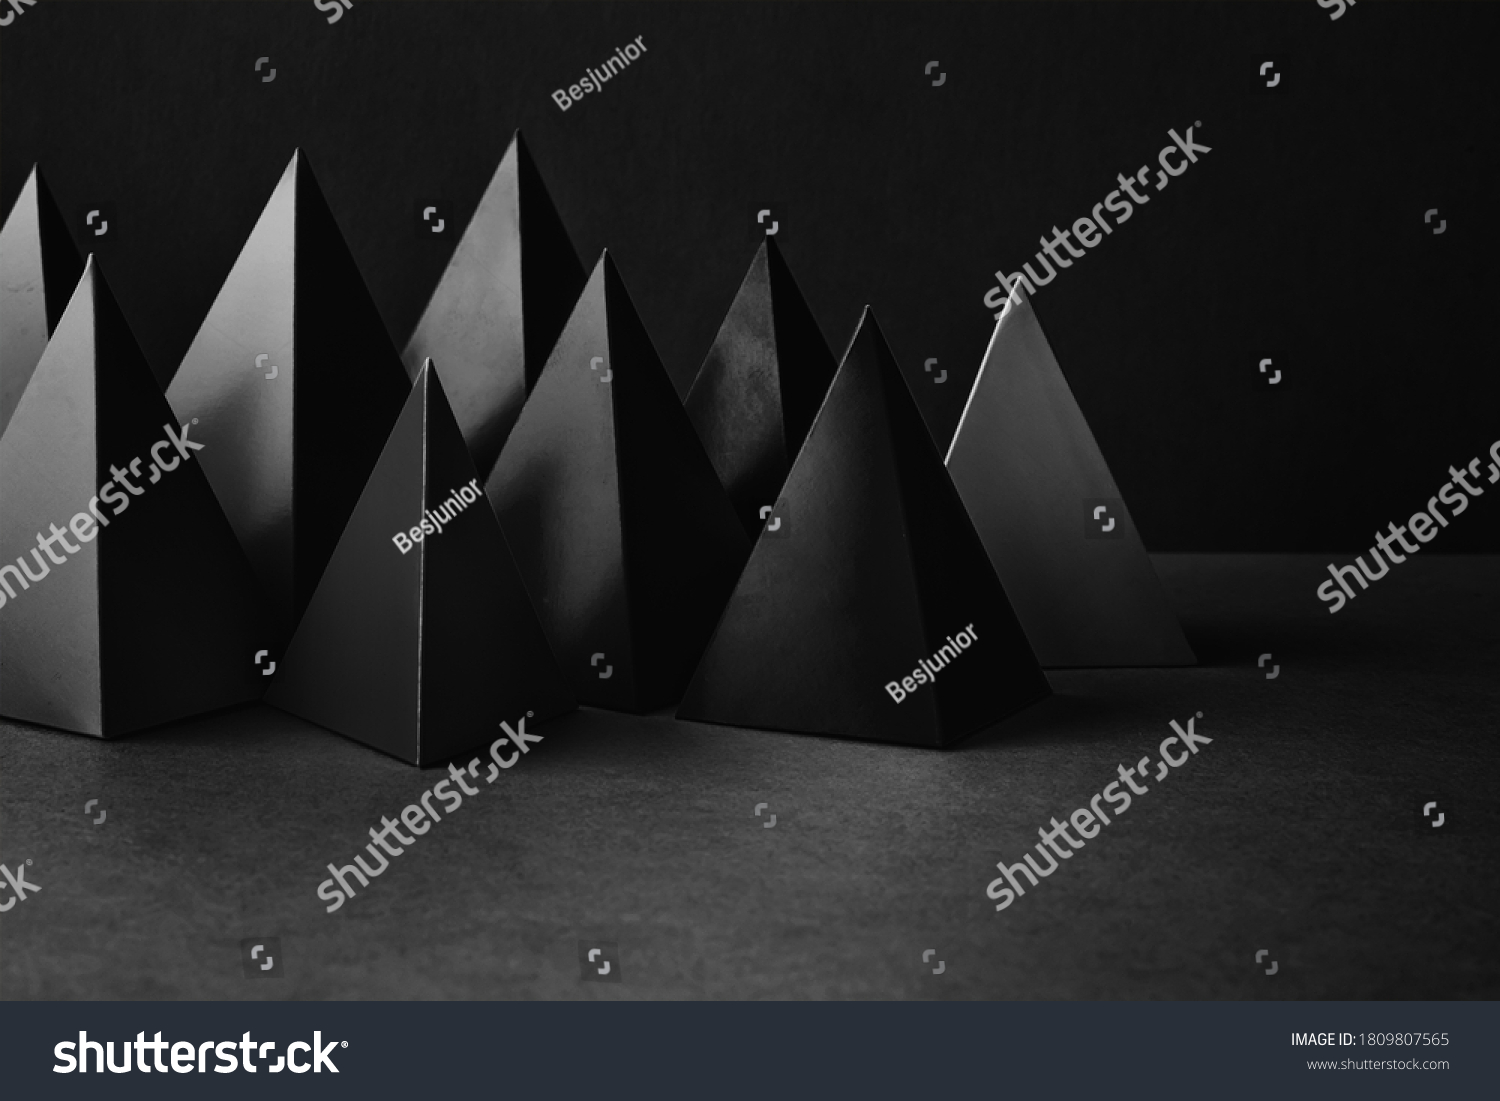 Prism pyramid objects on black gray background. Abstract geometrical figures still life composition #1809807565